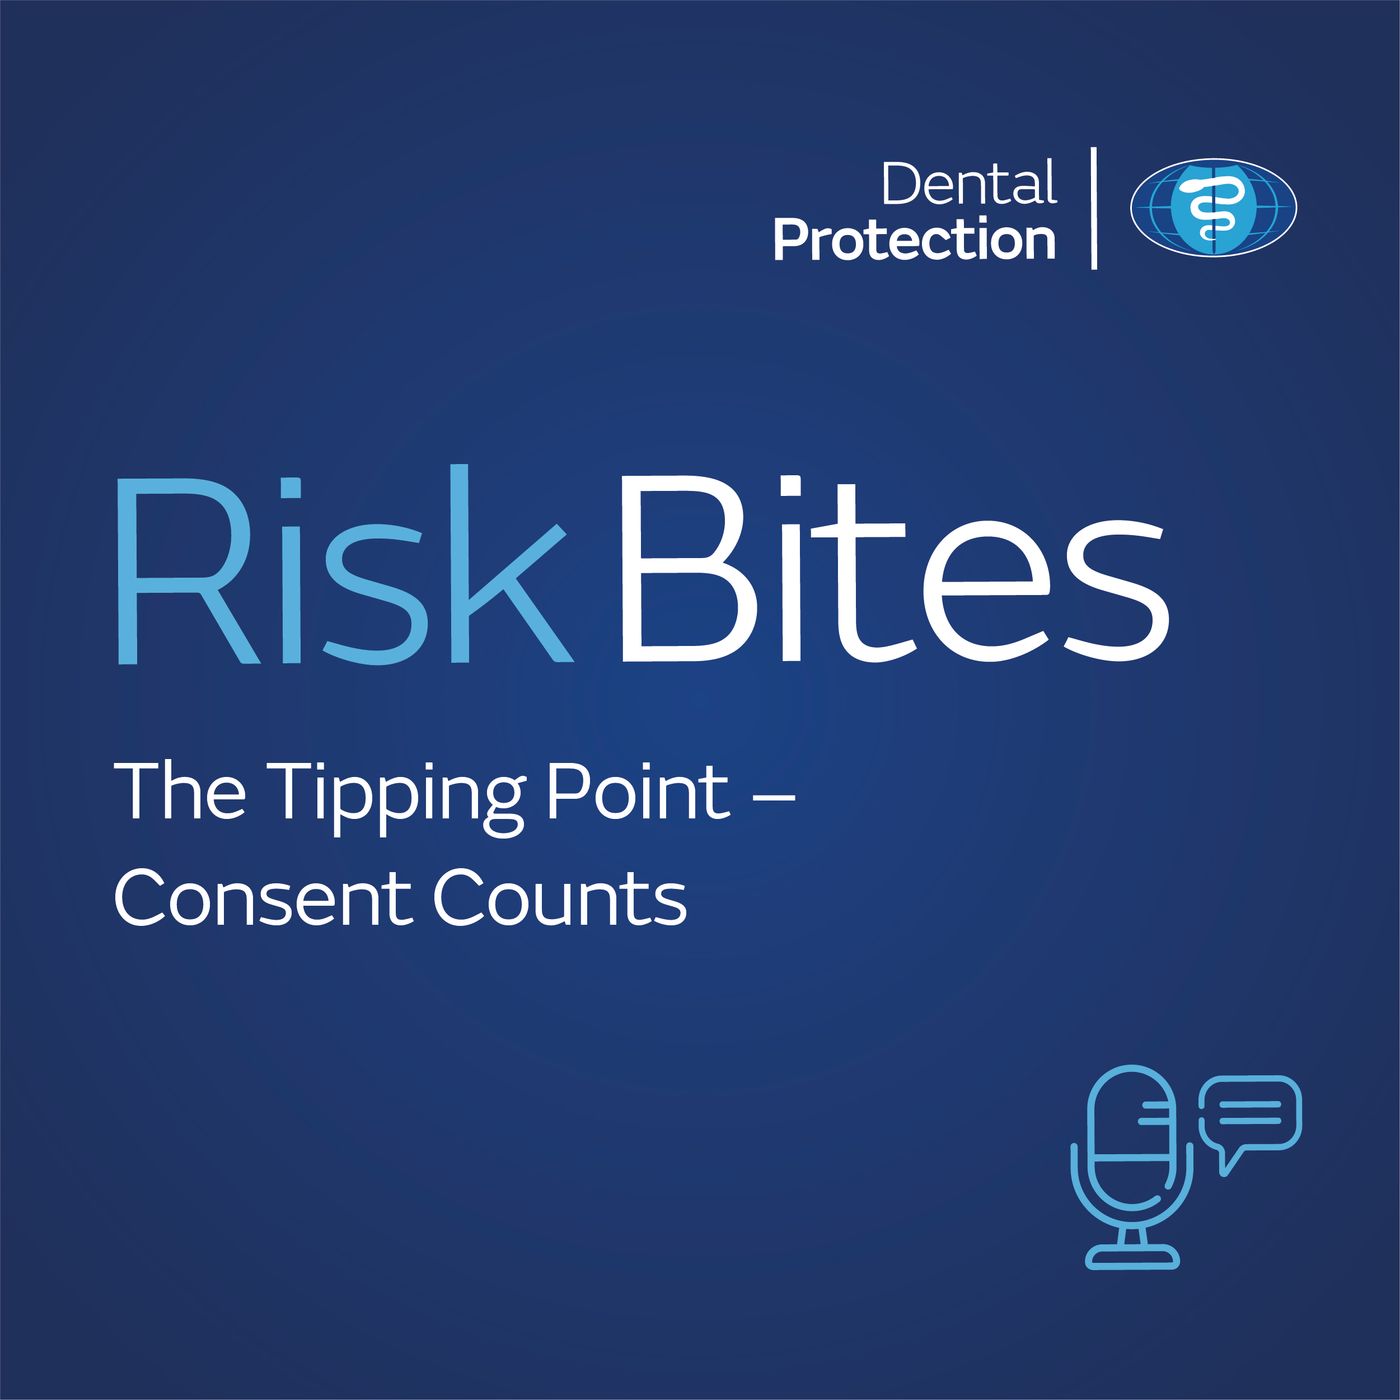 RiskBites - The Tipping Point - Consent Counts